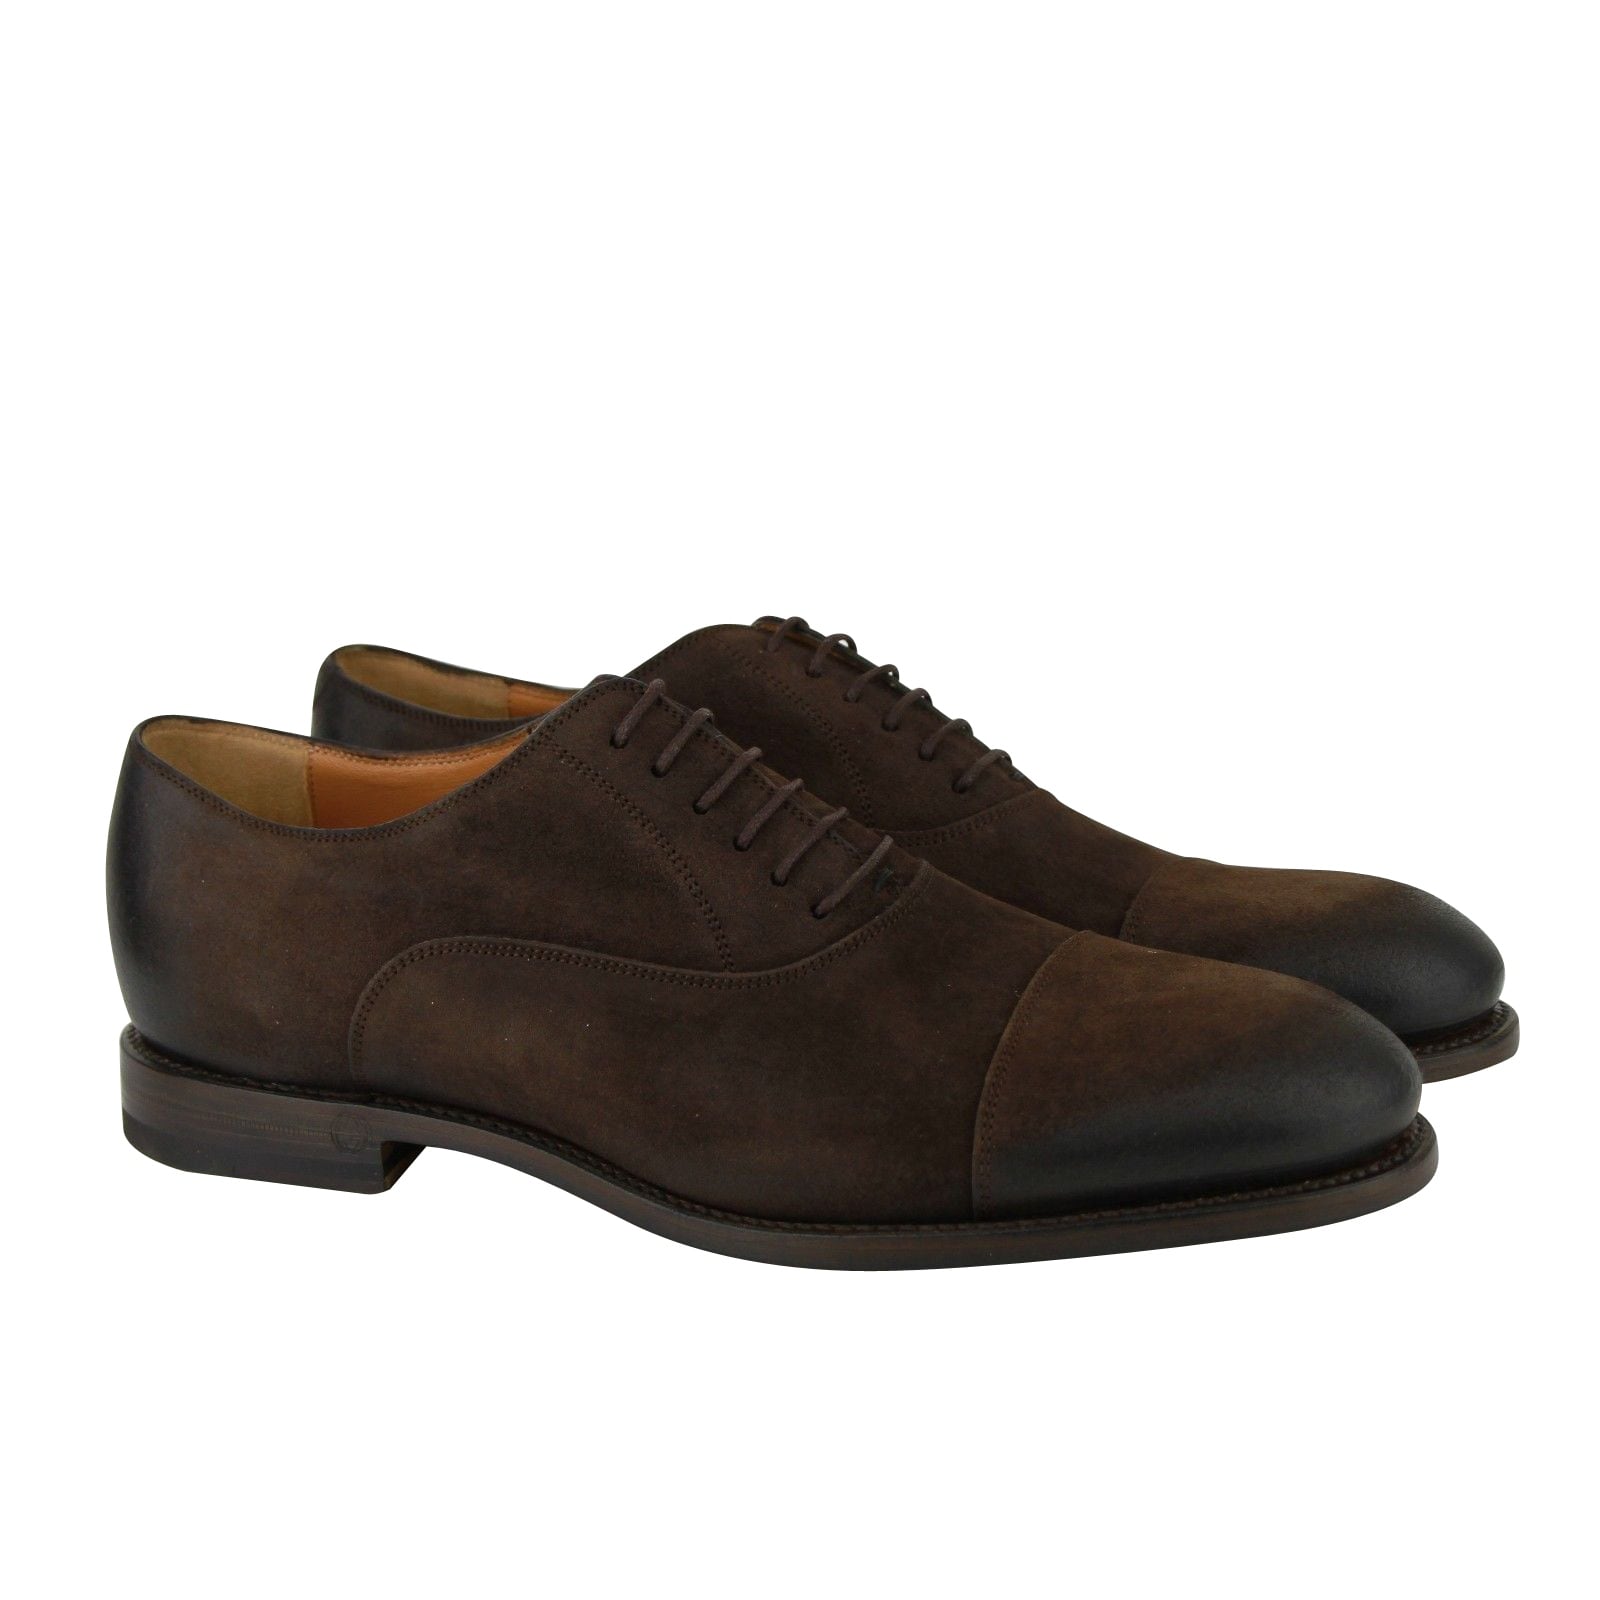 slip on oxford shoes mens